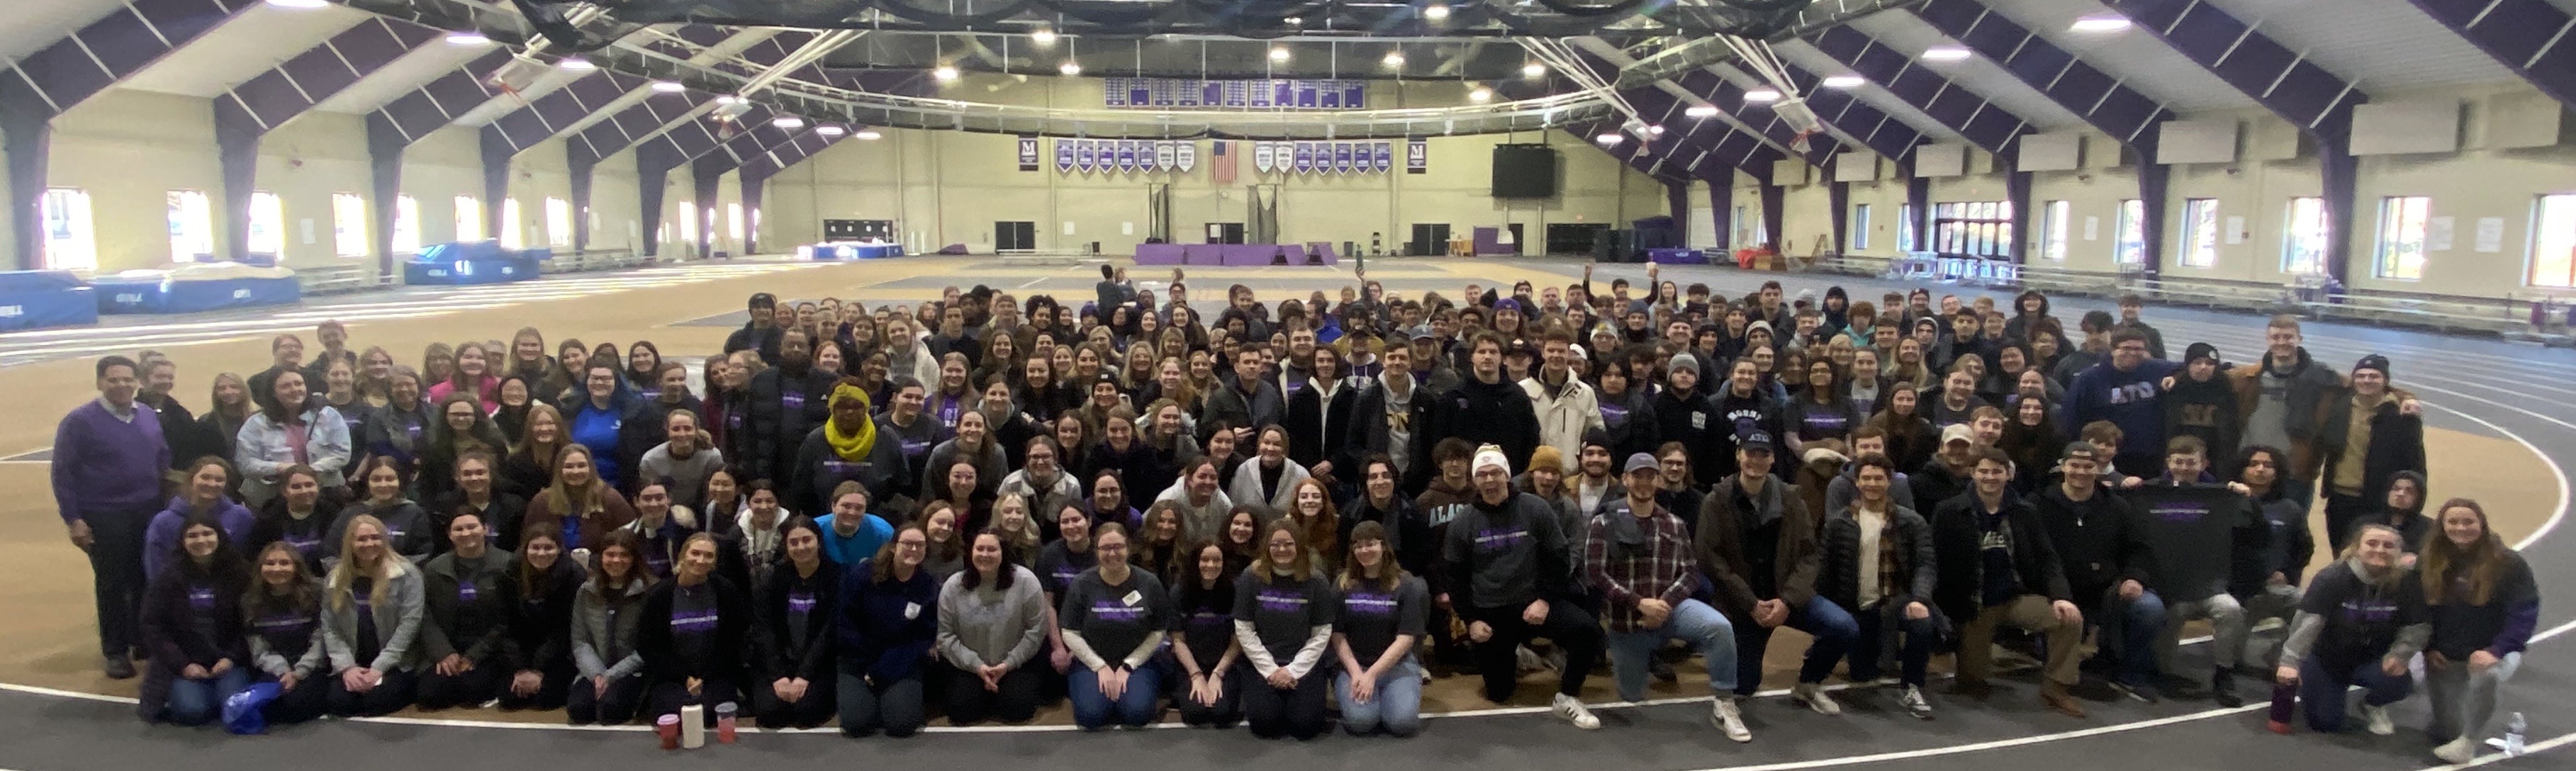 hundreds of volunteers in fieldhouse posed as a group